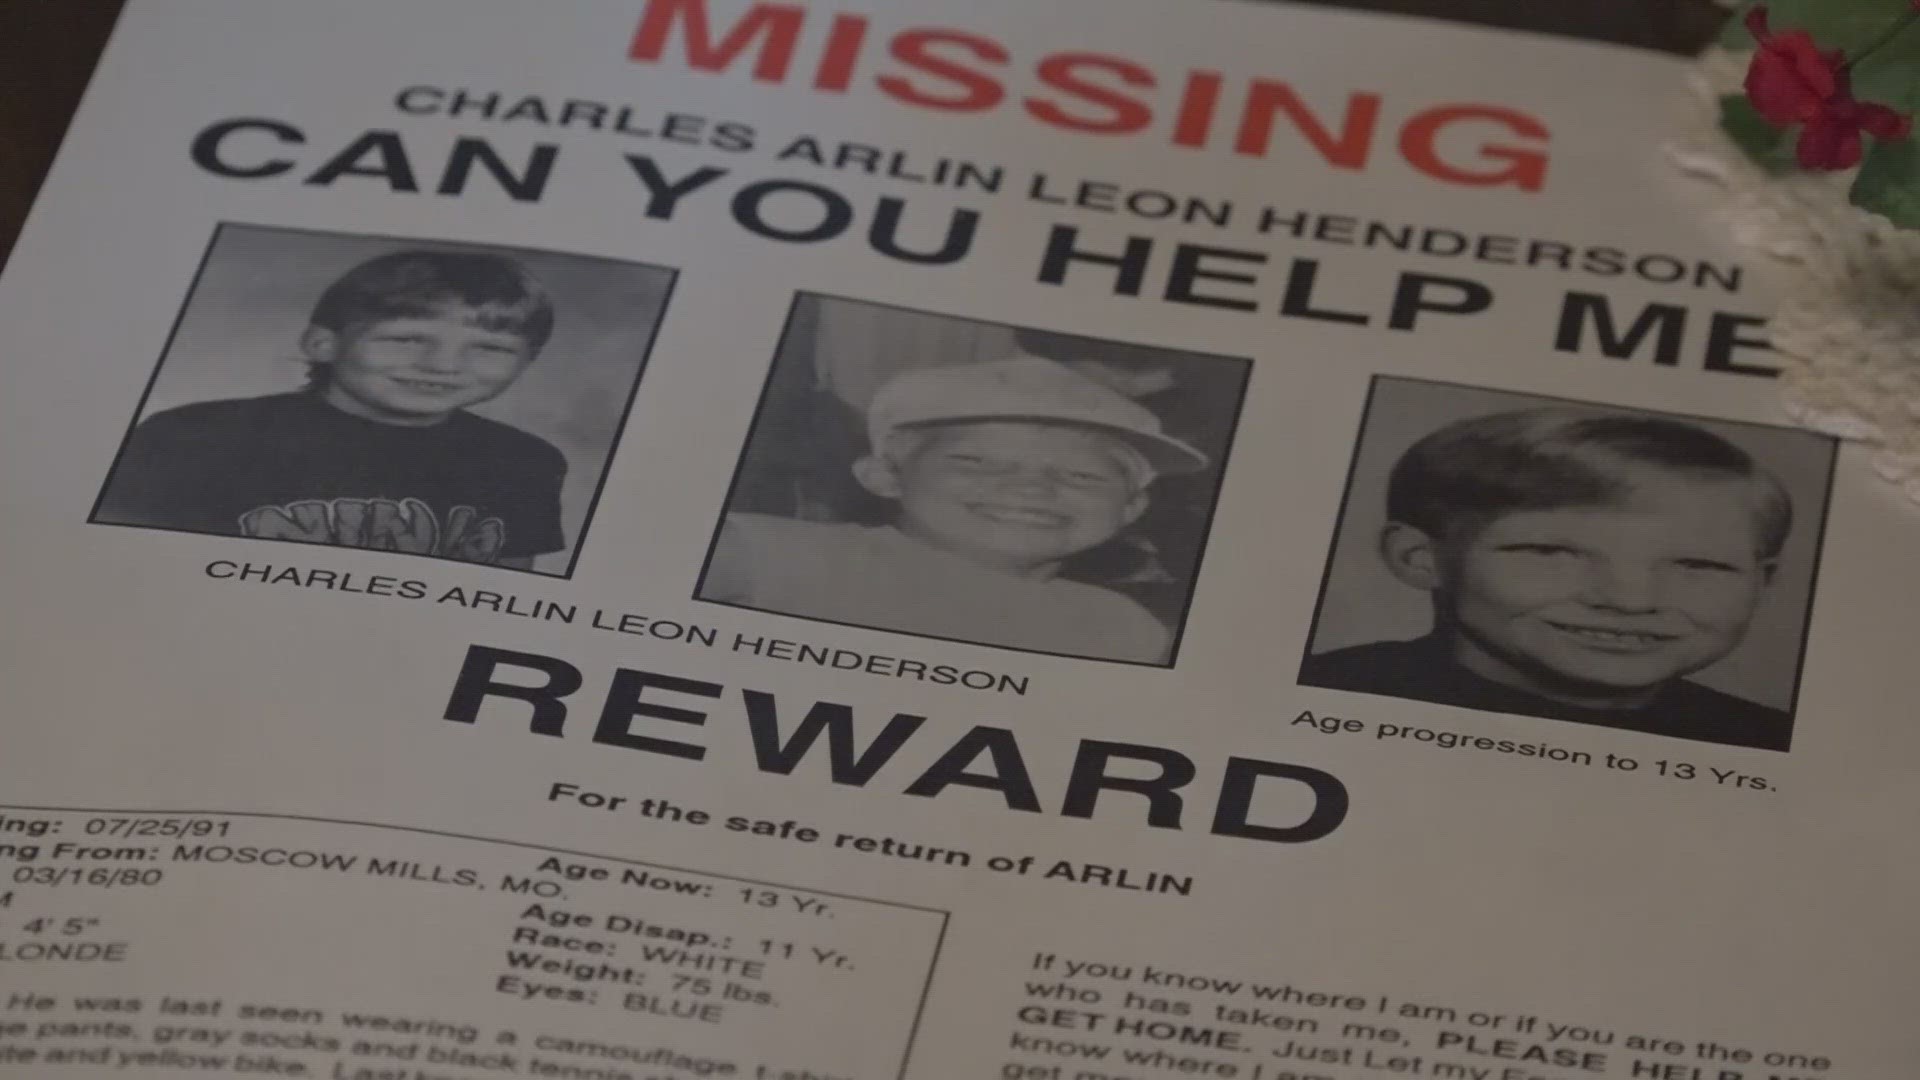 On July 25, 1991, 11-year-old Arlin Henderson was riding his bike near his Moscow Mills home. That was the last time he was seen.